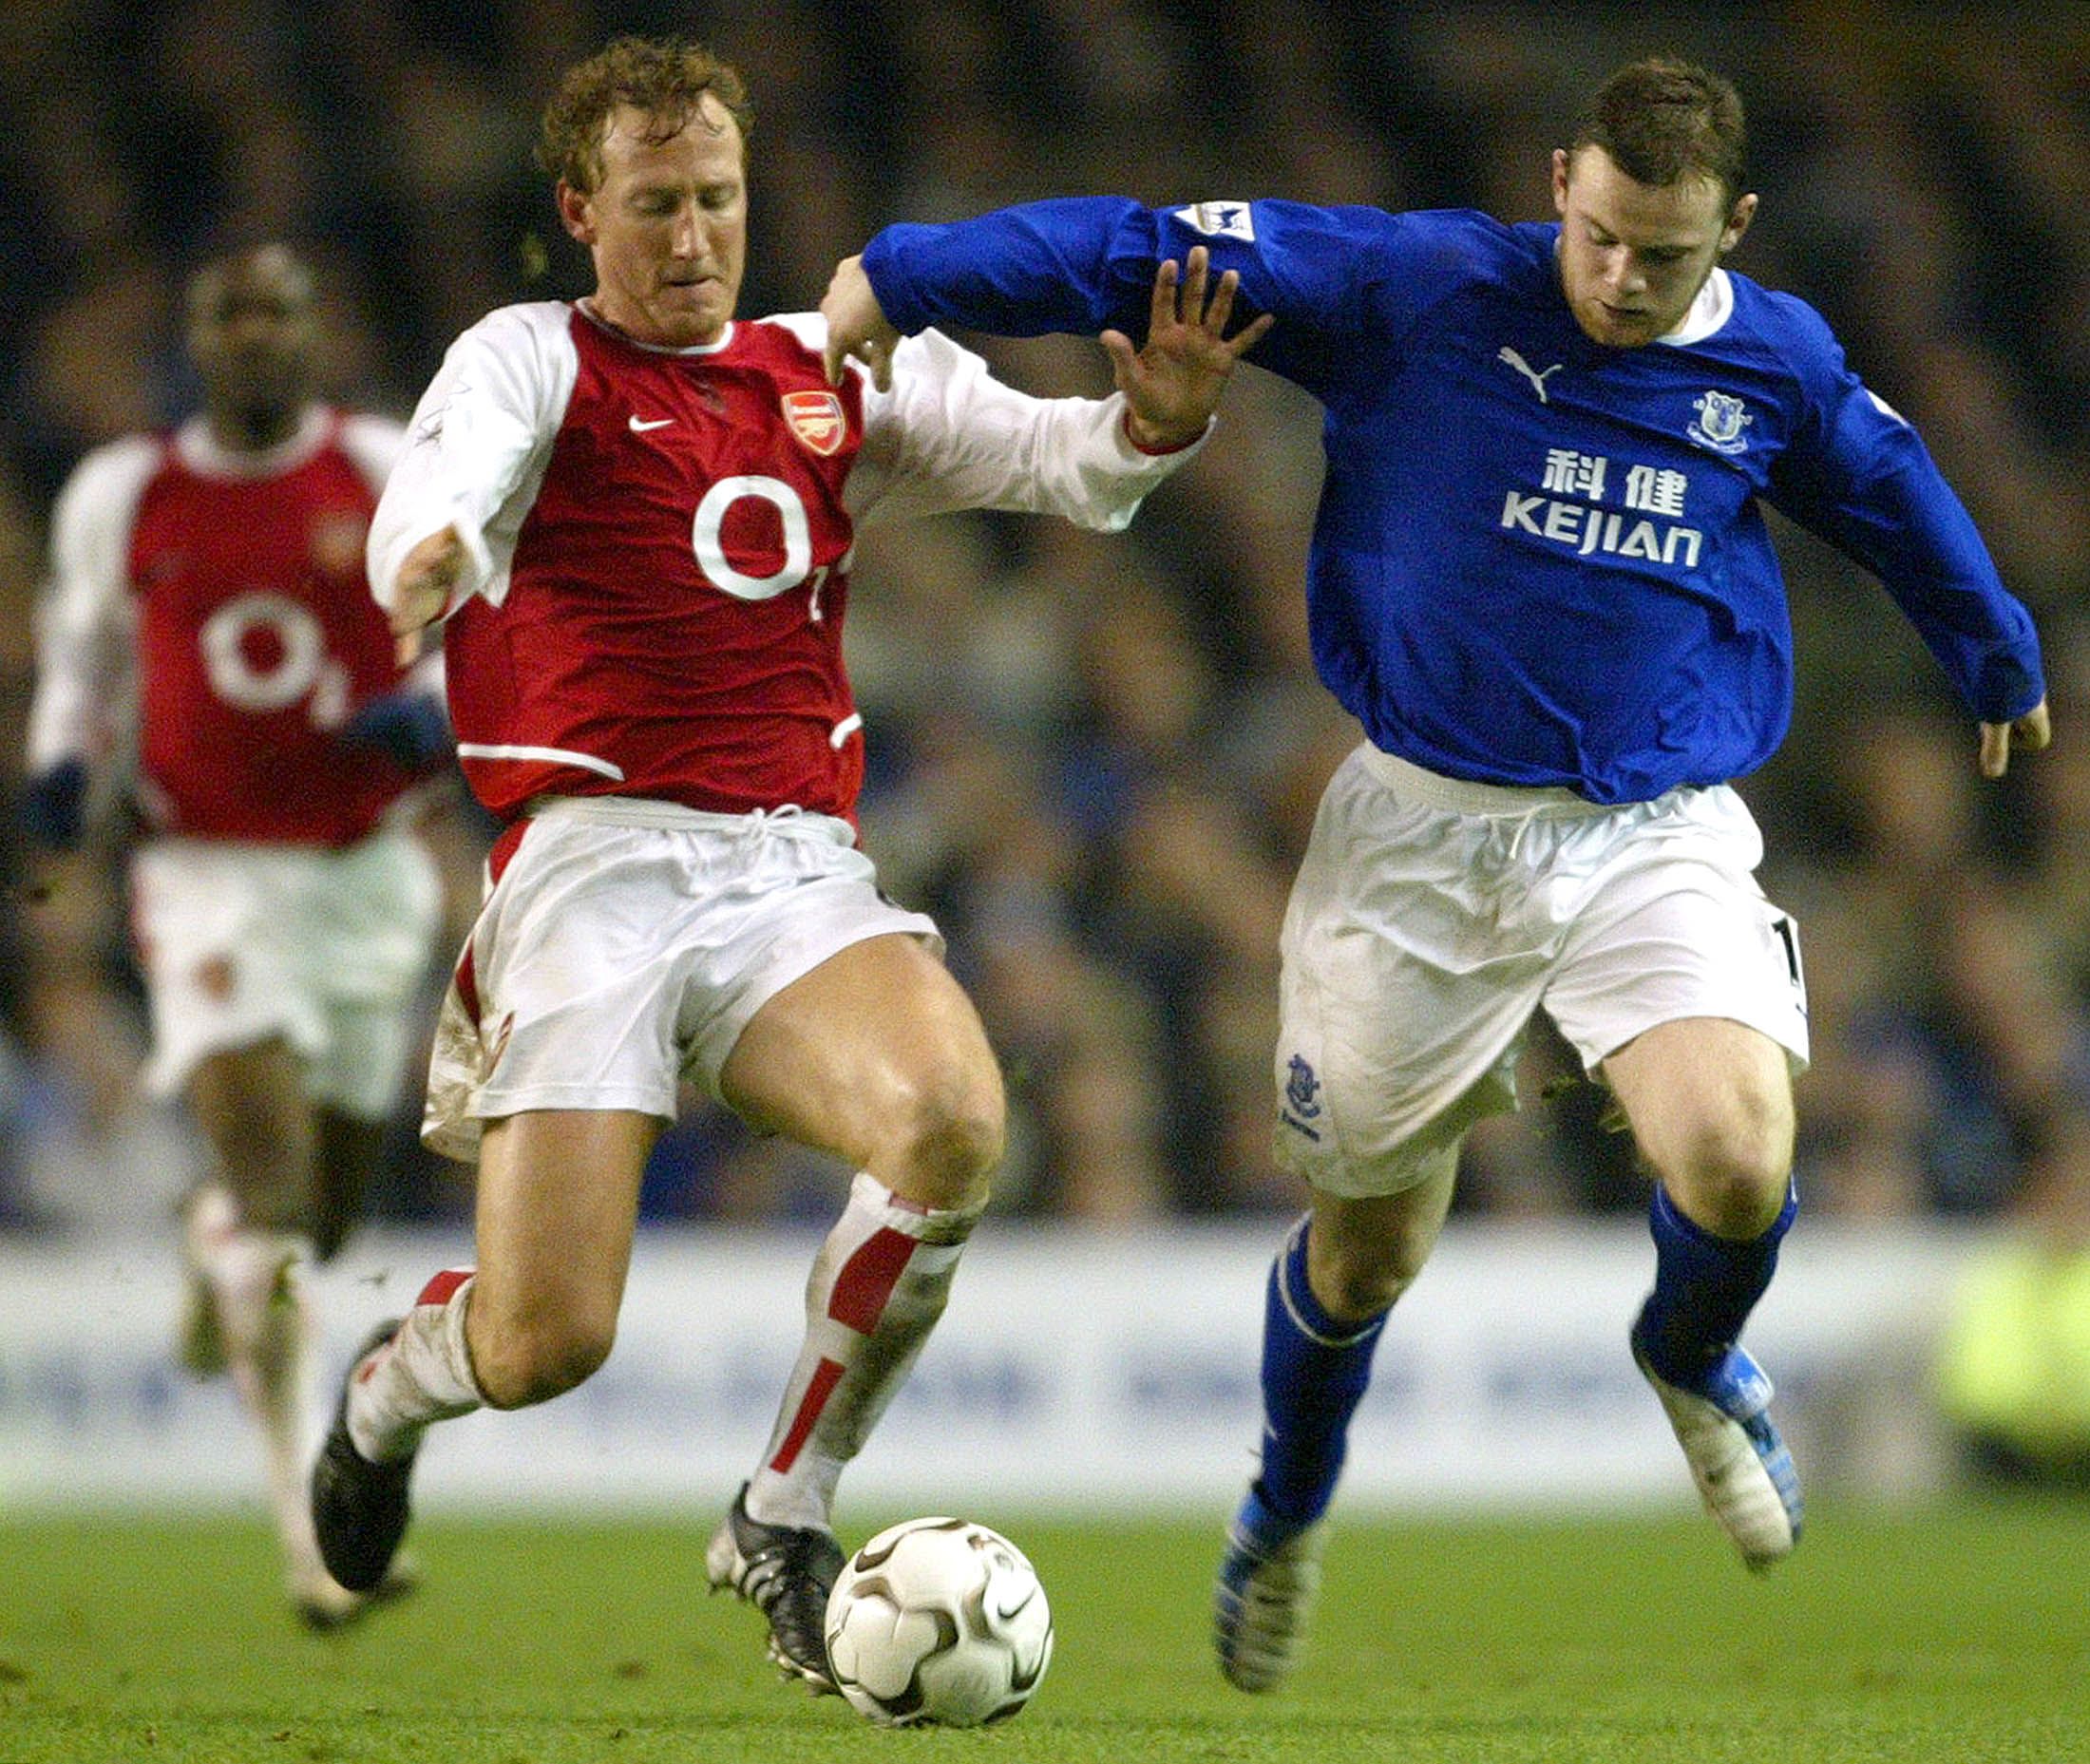 ARSENAL'S PARLOUR BATTLES WITH EVERTON'S ROONEY DURING THEIR ENGLISH PREMIER LEAGUE SOCCER MATCH AT GOODISON PARK.  Arsenal's Ray Parlour (L) battles with Everton's Wayne Rooney (R) during their English premier league soccer match at Goodison Park, January 7, 2004. The match ended 1-1. NO INTERNET/ONLINE USAGE WITHOUT FAPL LICENCE, FOR DETAILS SEE WWW.FAPLWEB.COM REUTERS/Darren Staples